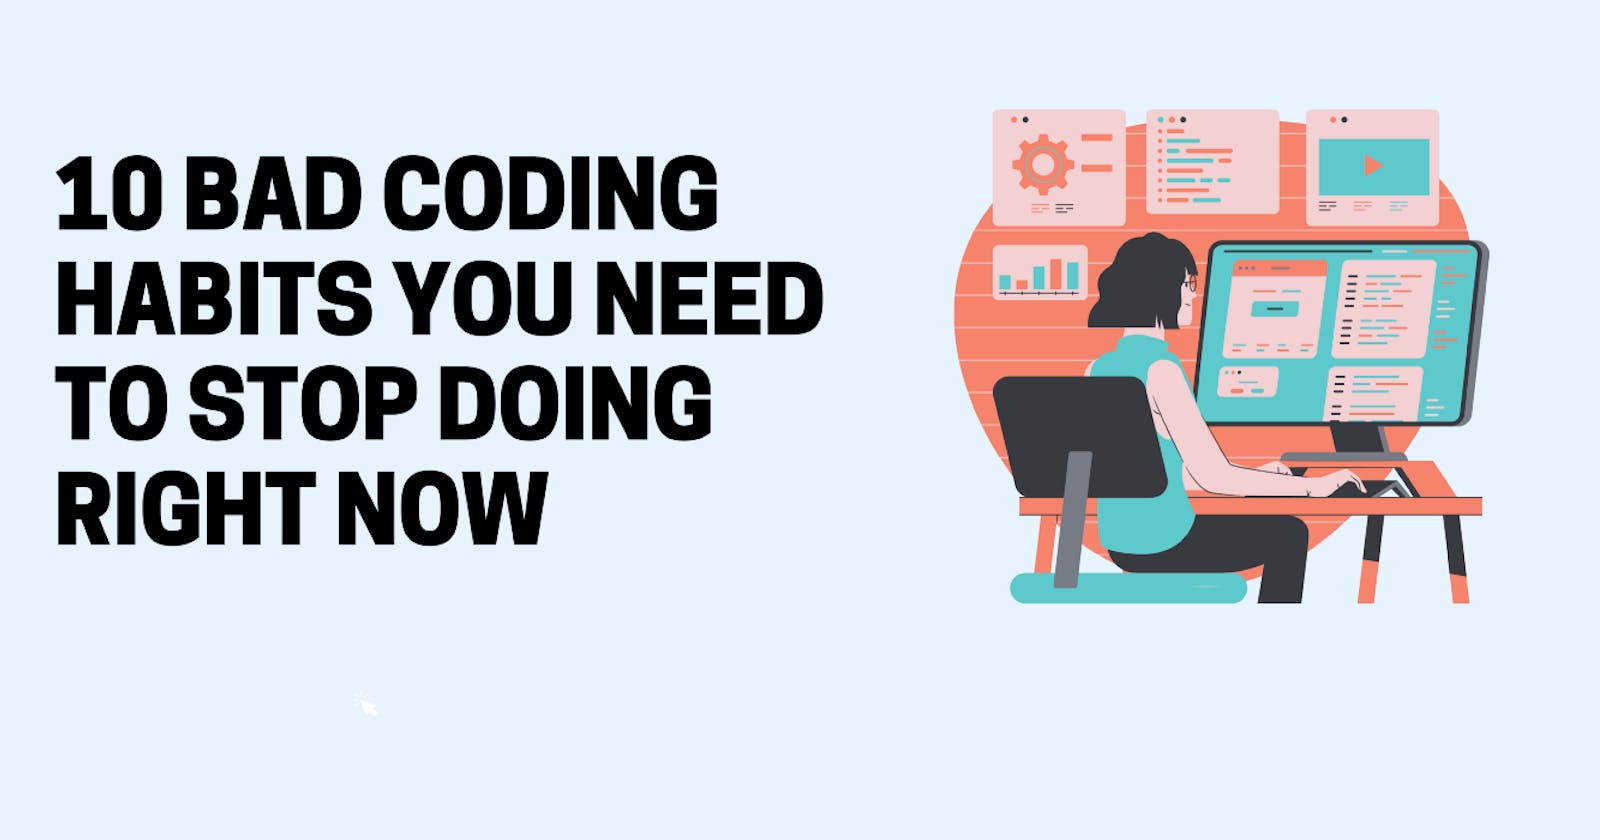 10 Bad Coding Habits You Need to Put an End to Right Now